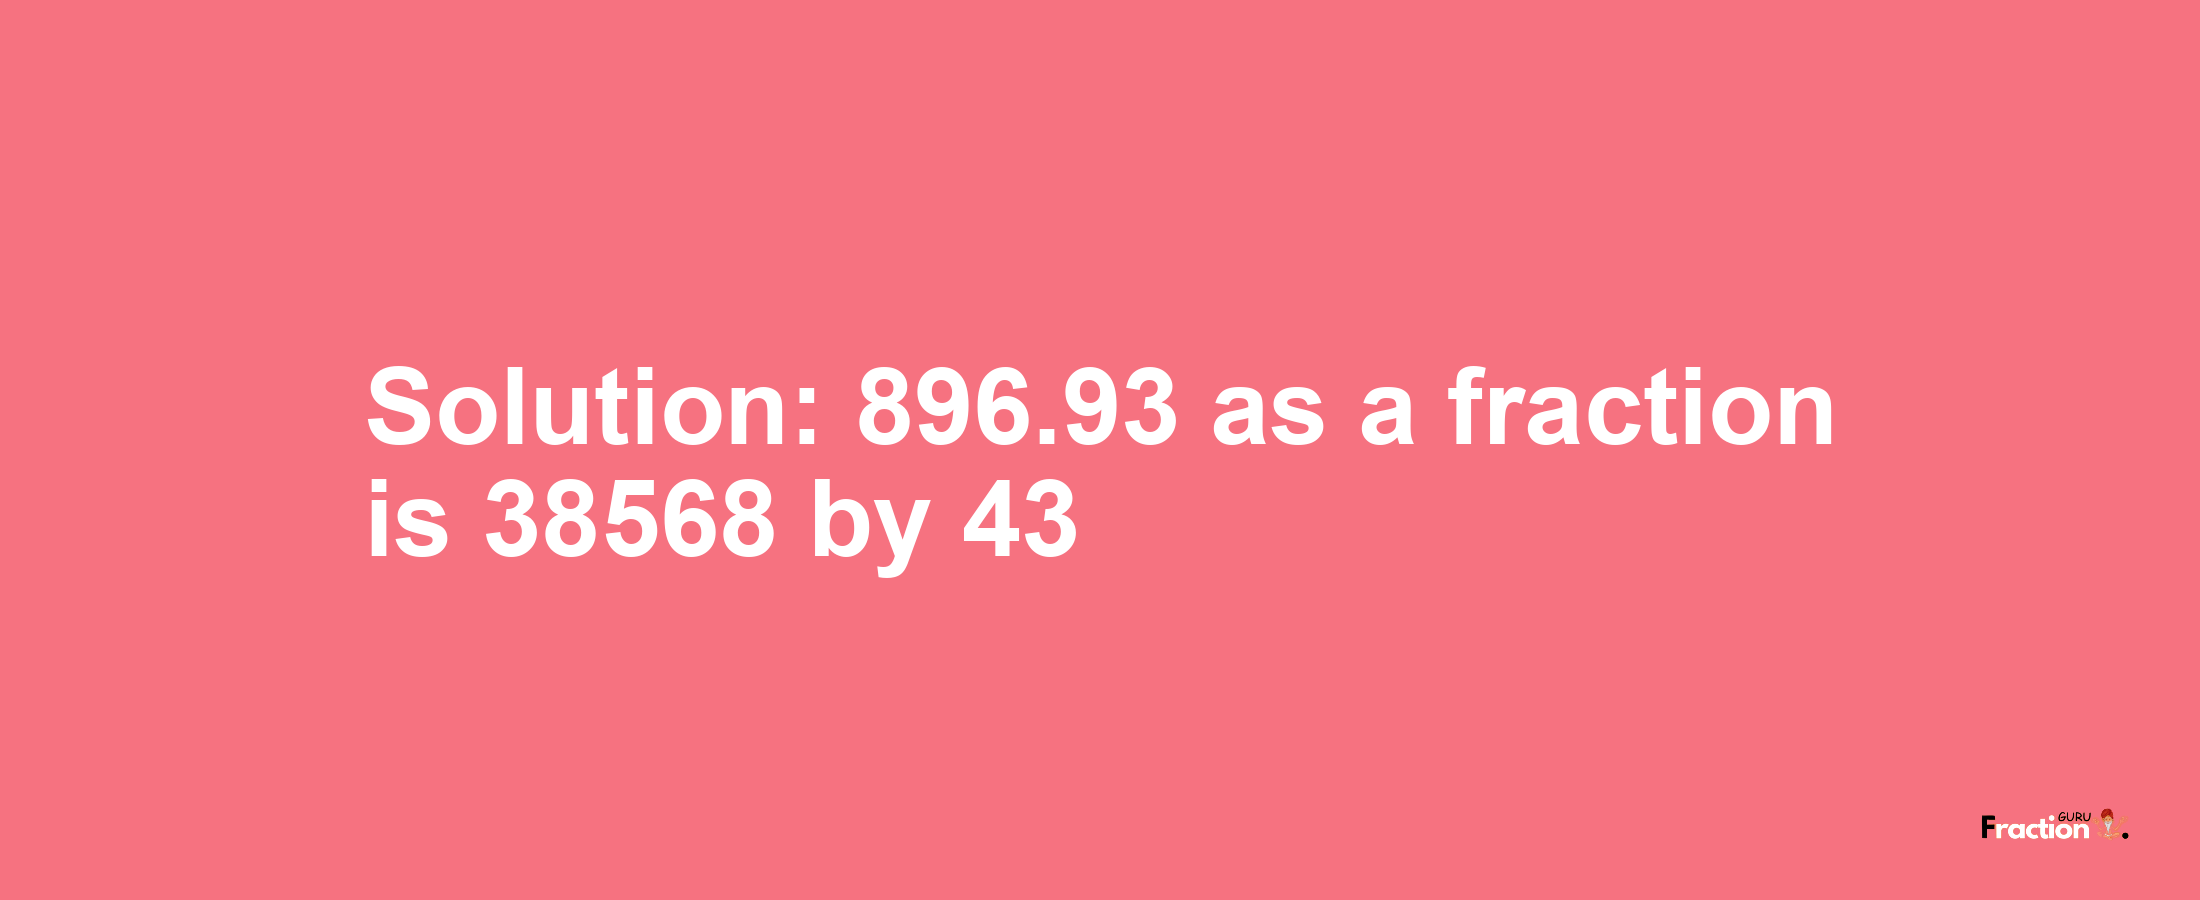 Solution:896.93 as a fraction is 38568/43